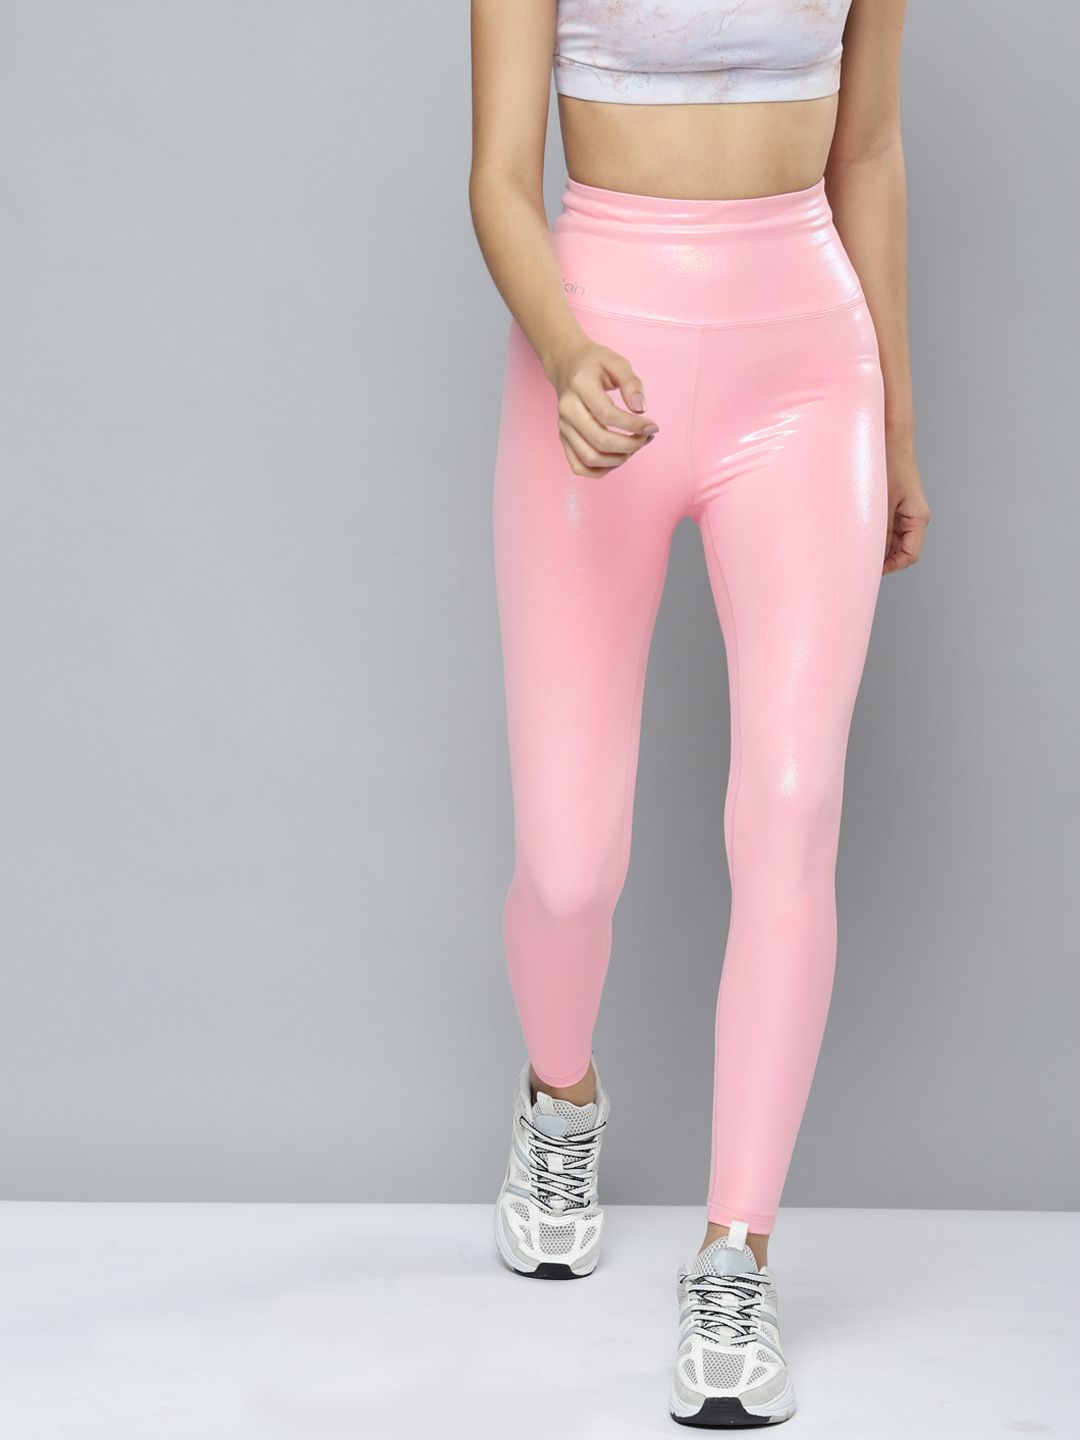 Fitkin Pink Women Shine on High rise Full Length Tights Price in India